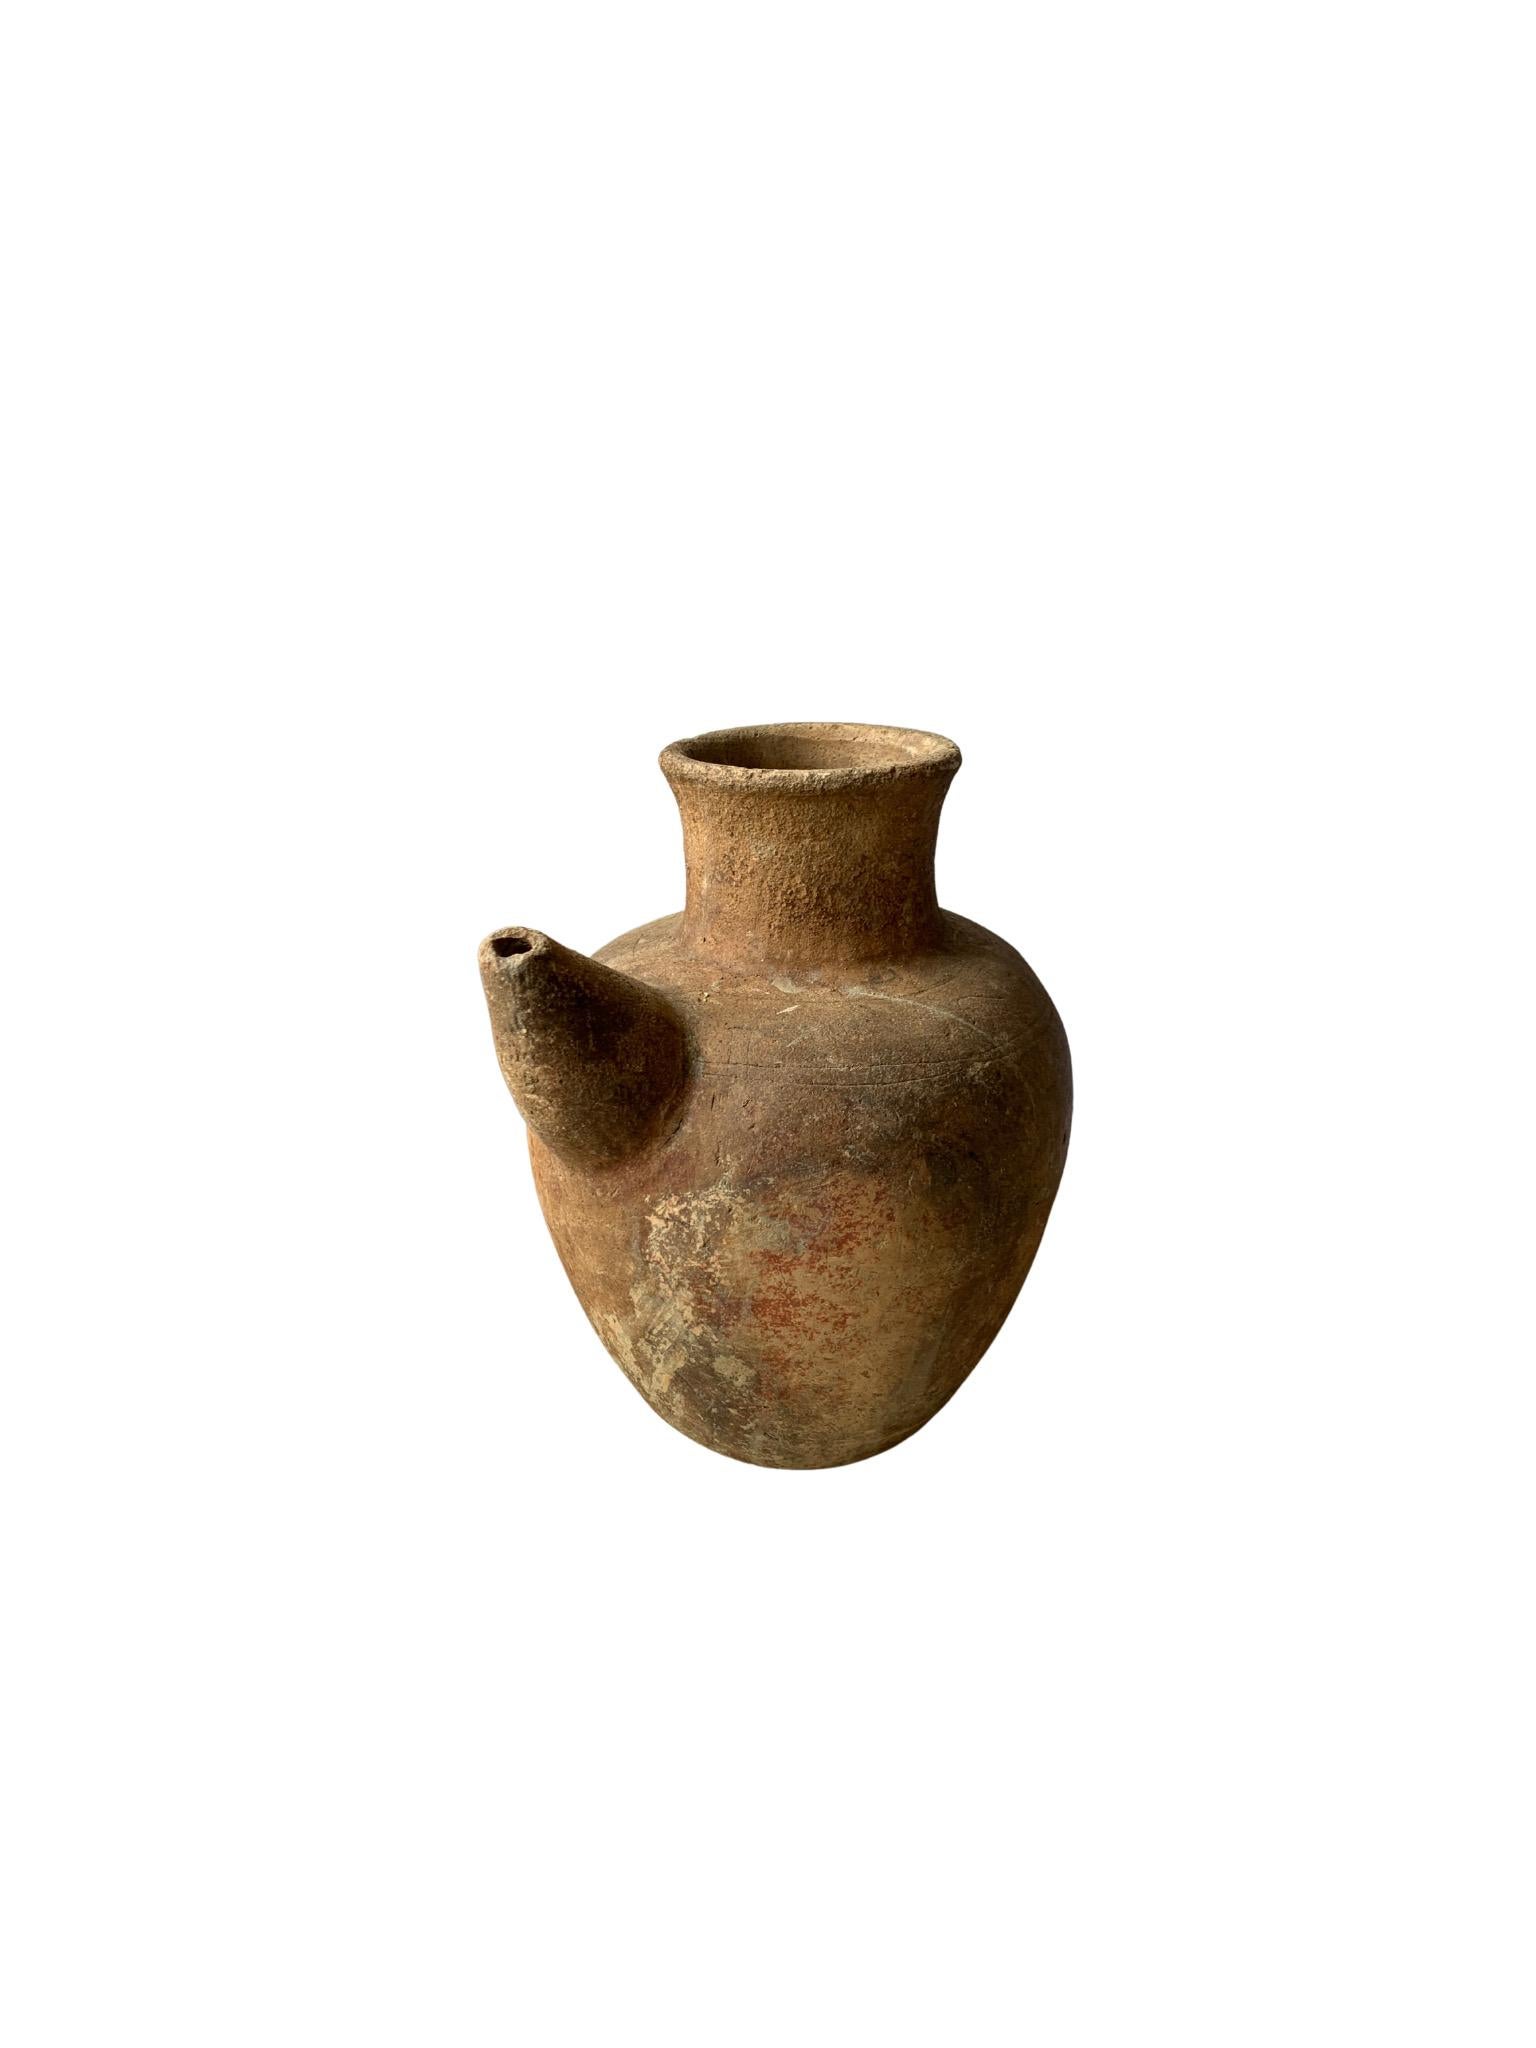 Tribal Terracotta Jar from Java, Indonesia c. 1900 For Sale